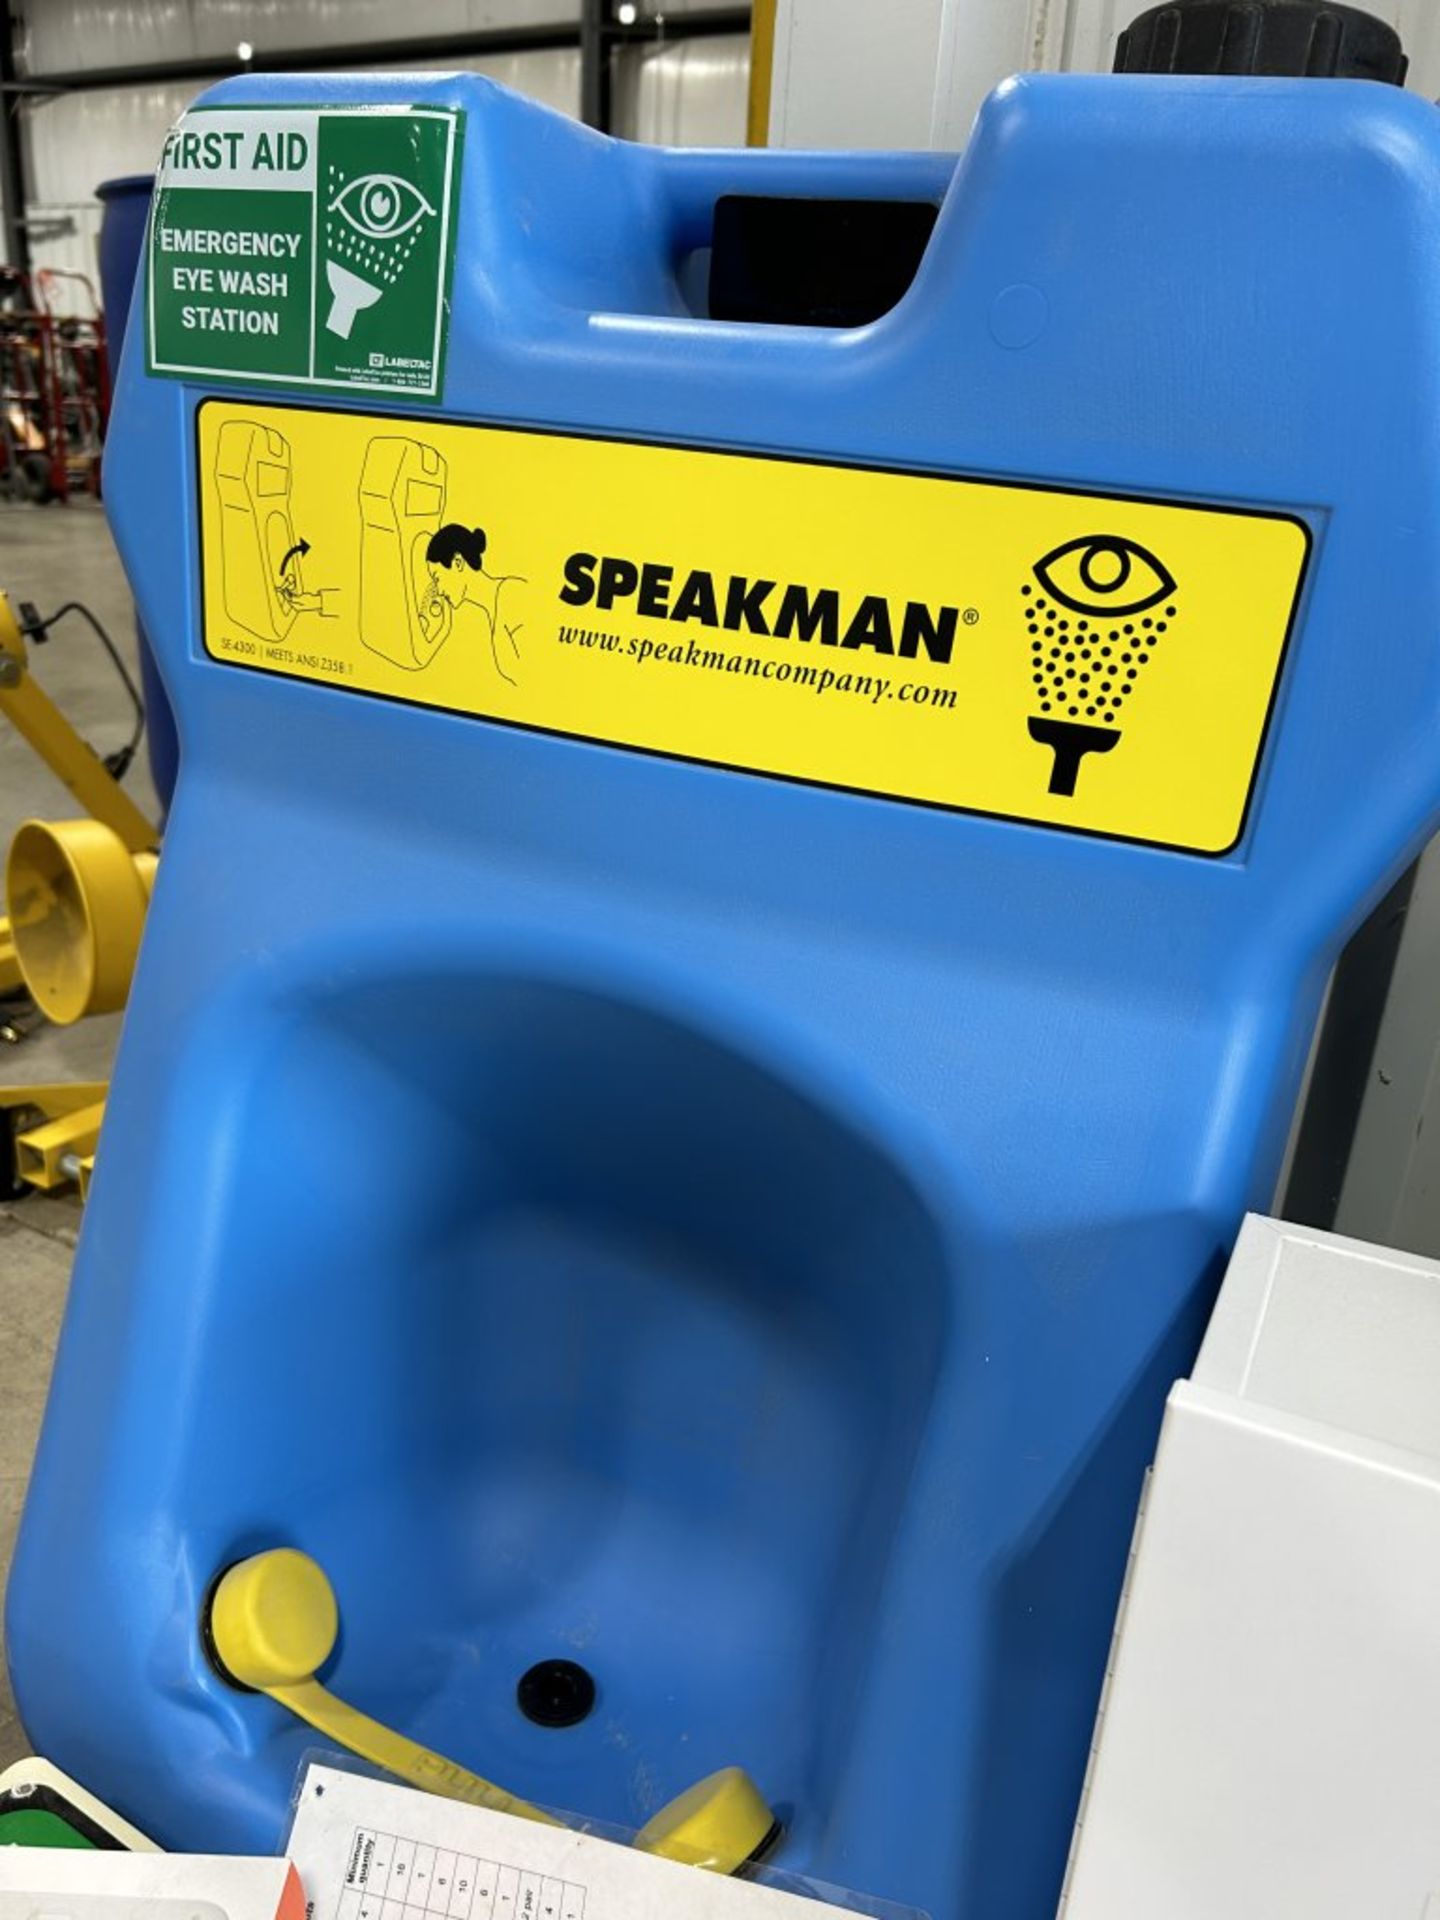 SPEAKMAN EYEWASH STATION, FIRST AID KIT, CAUTION SIGN, AND MORE. - Image 7 of 7